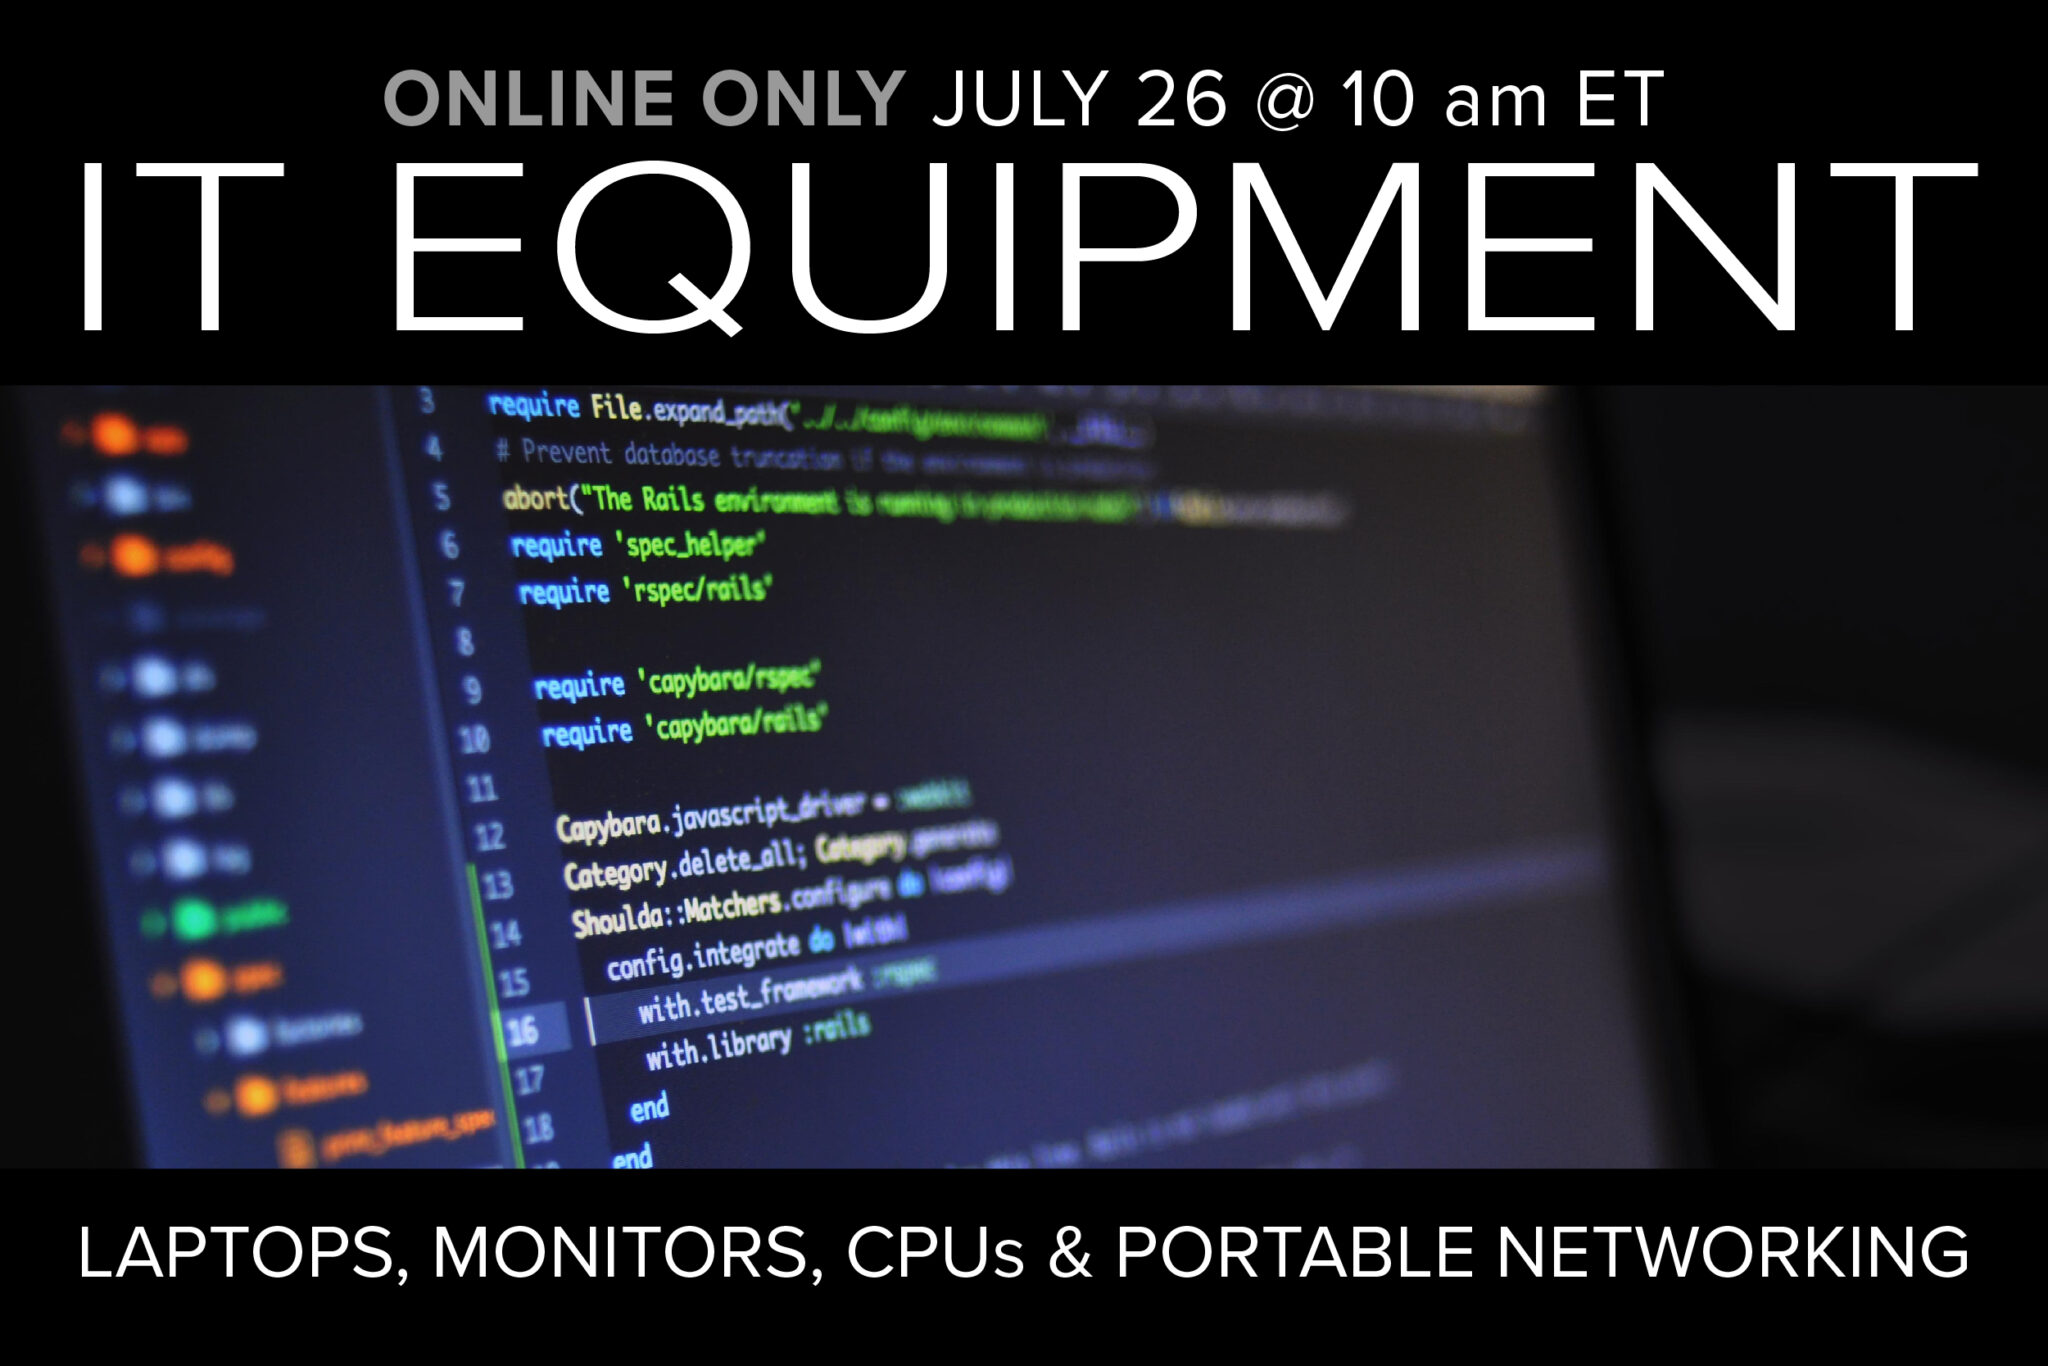 IT Equipment Online Only Auction on July 26 at 10am ET